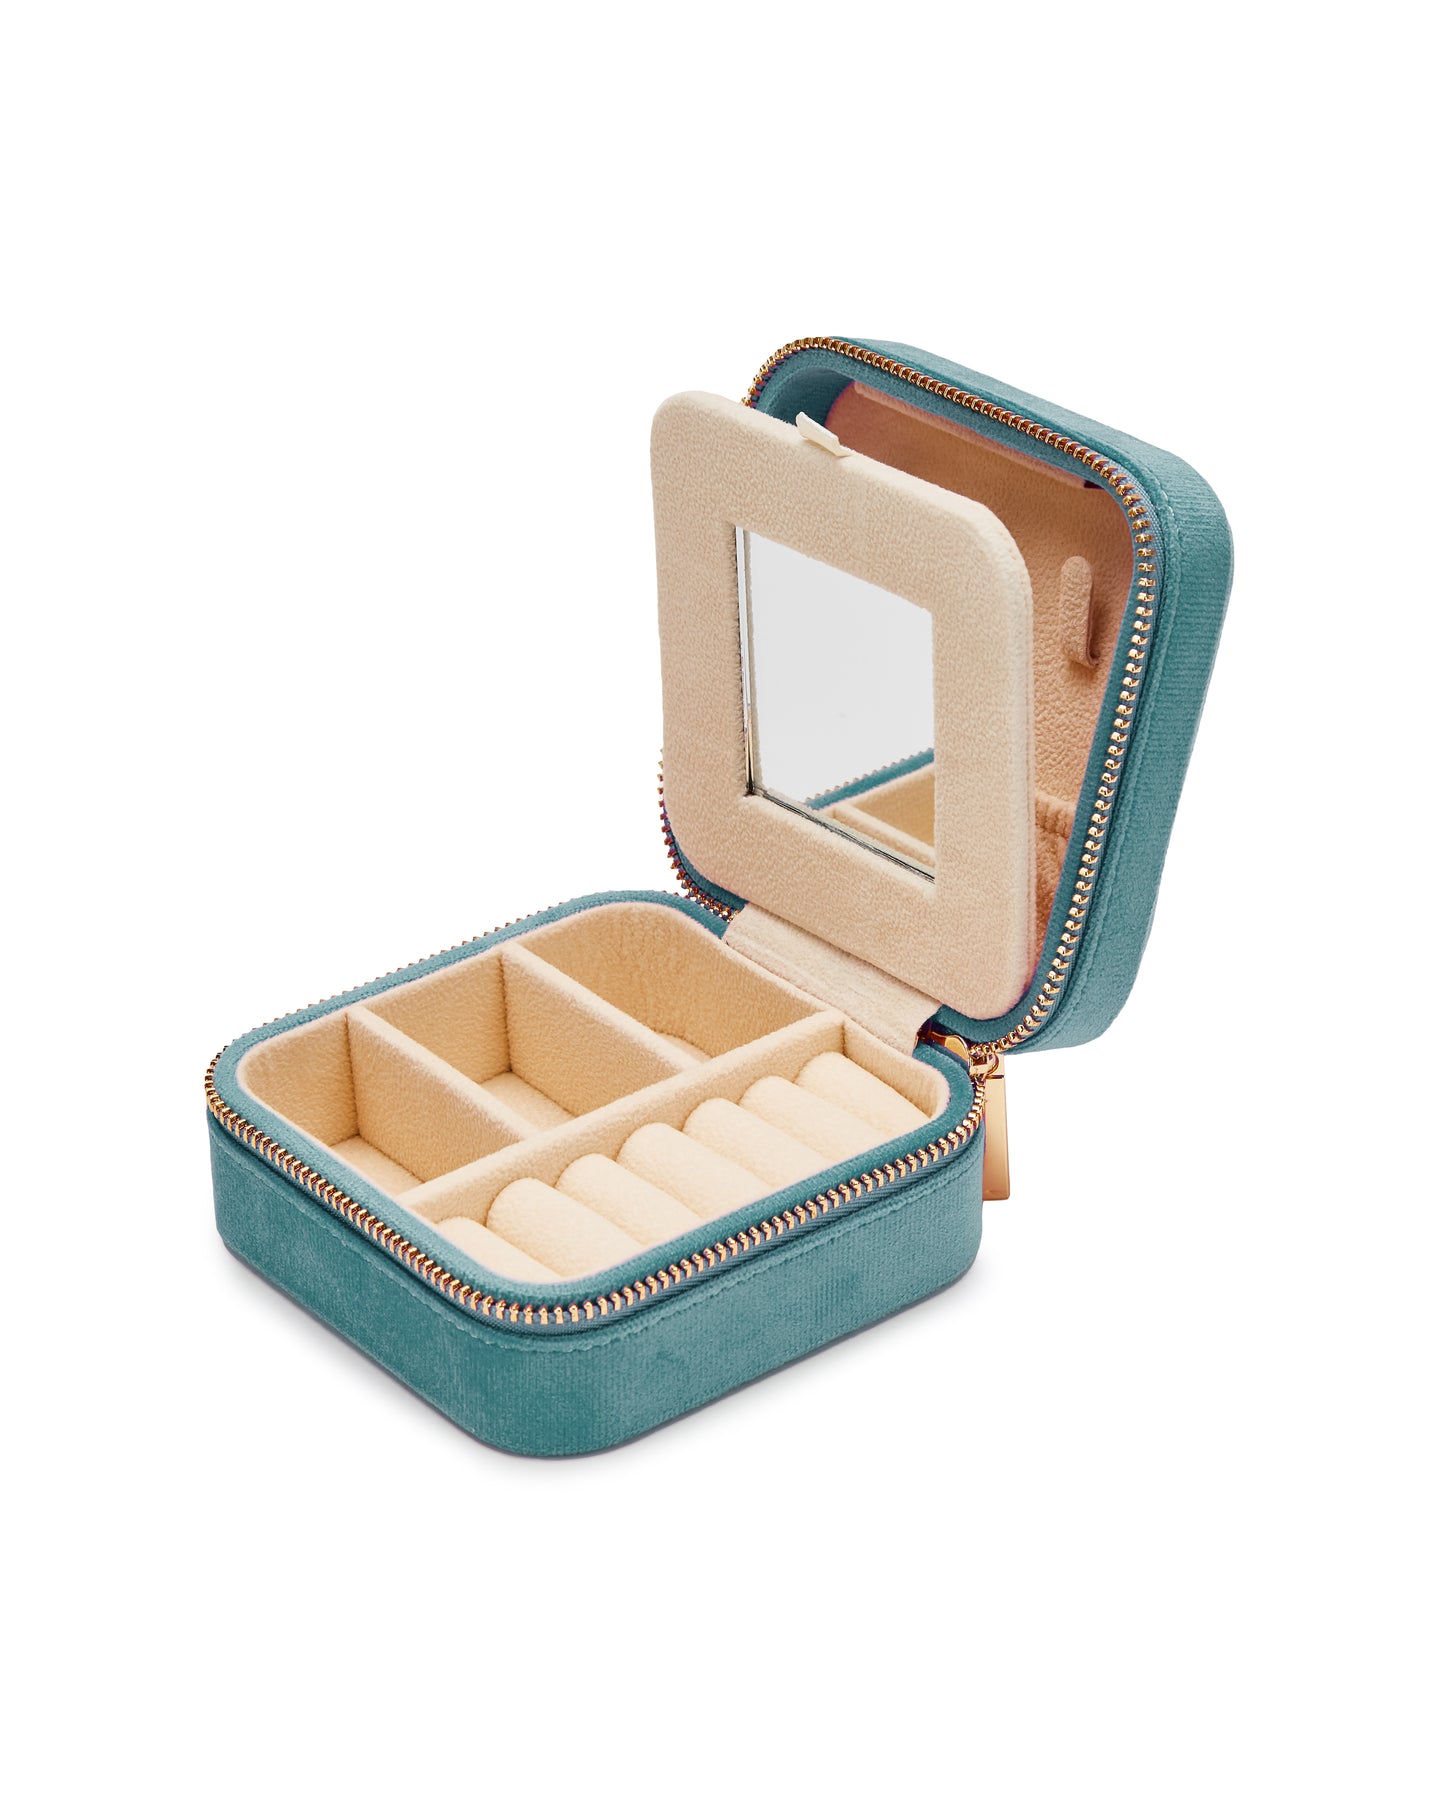 VELVET JEWELRY BOX col. petrol blue, directly orderable - 5 pieces